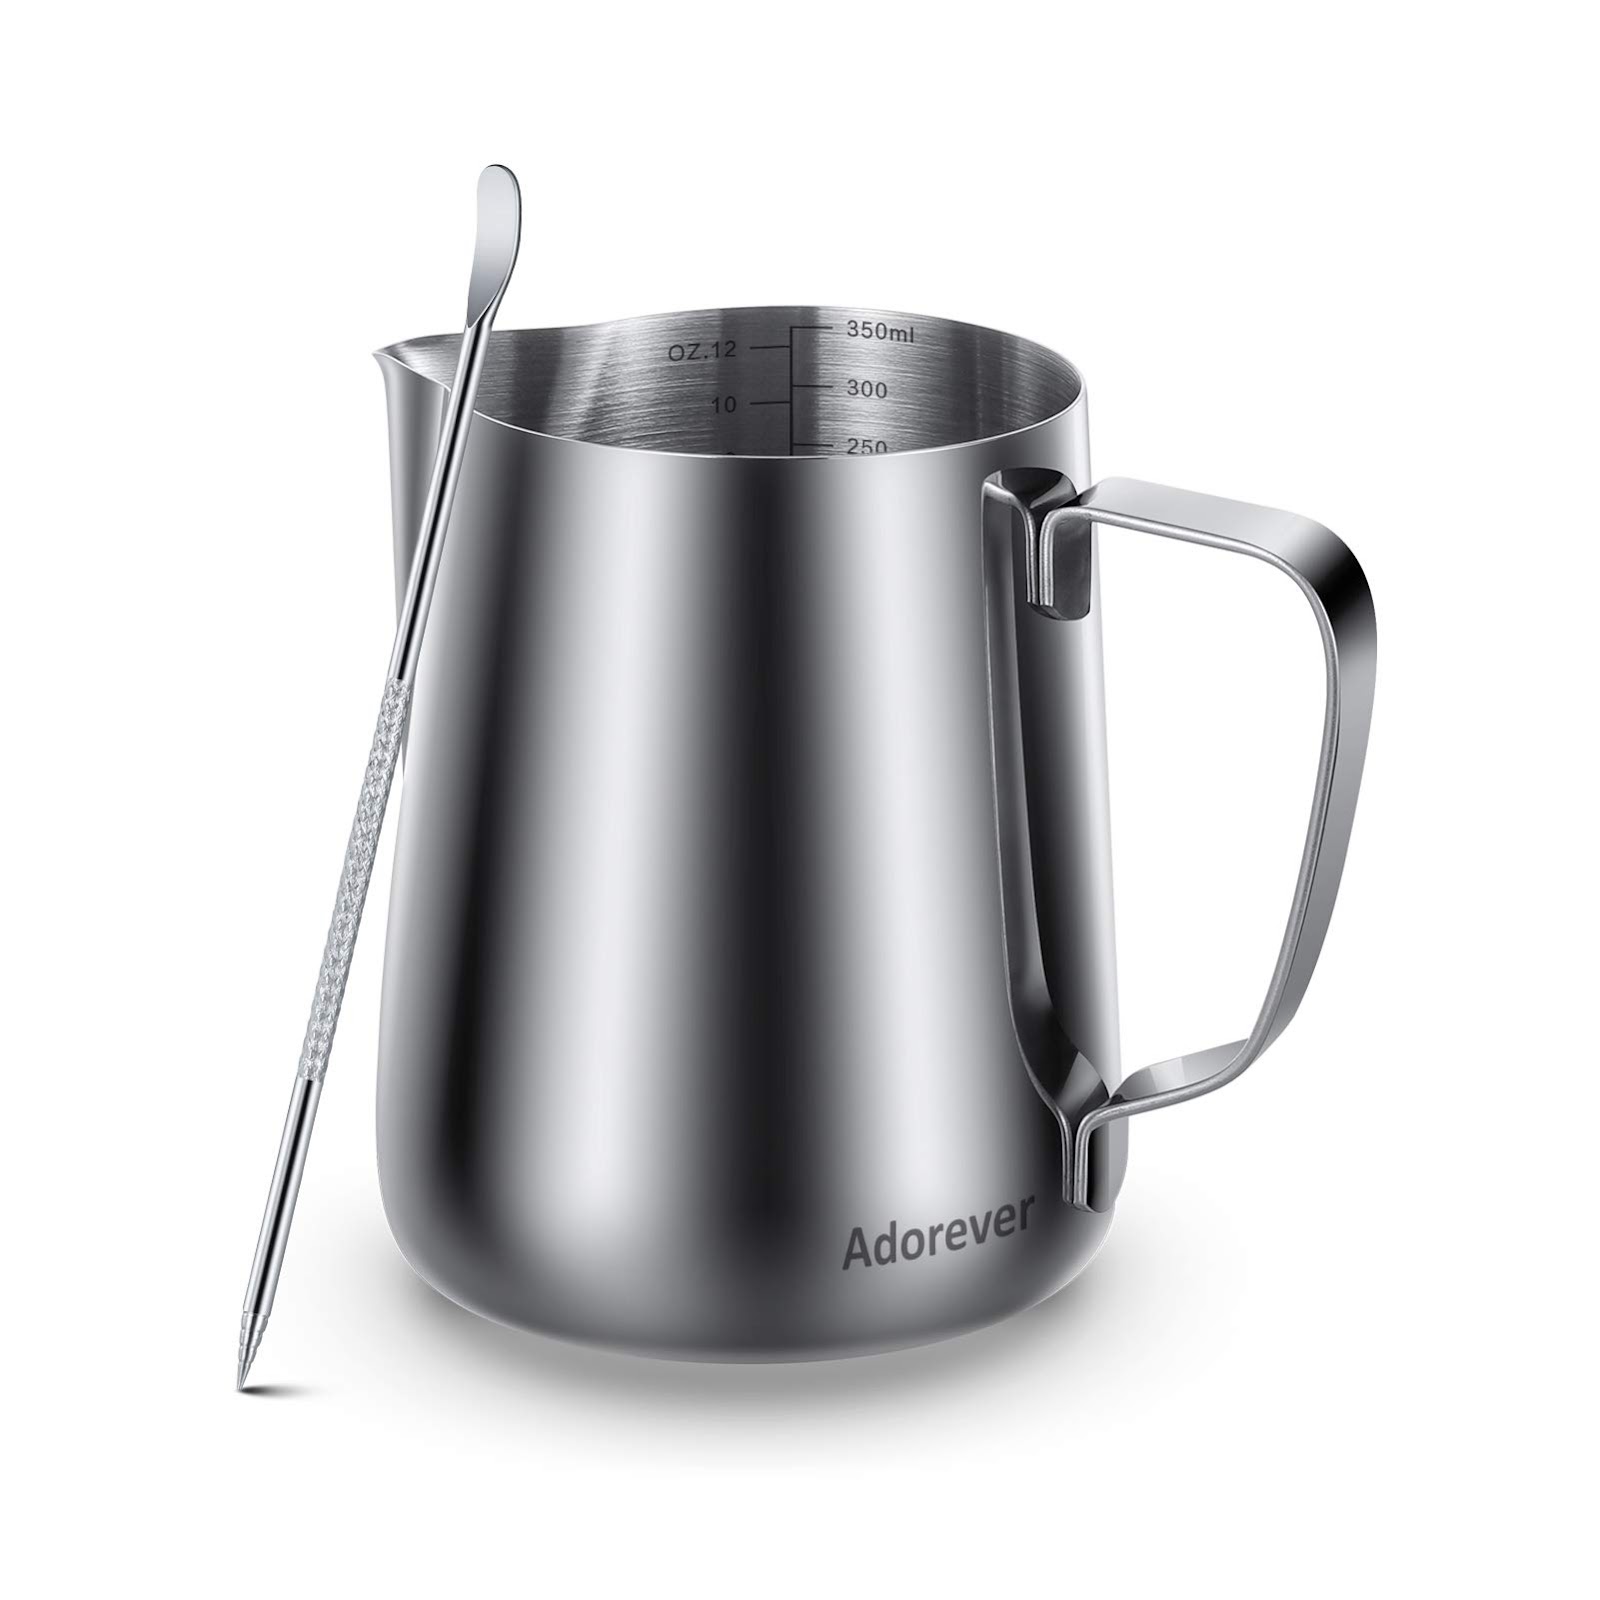 Frothing Pitcher Best Milk Frother Steamer Cup - Easy to Read Creamer